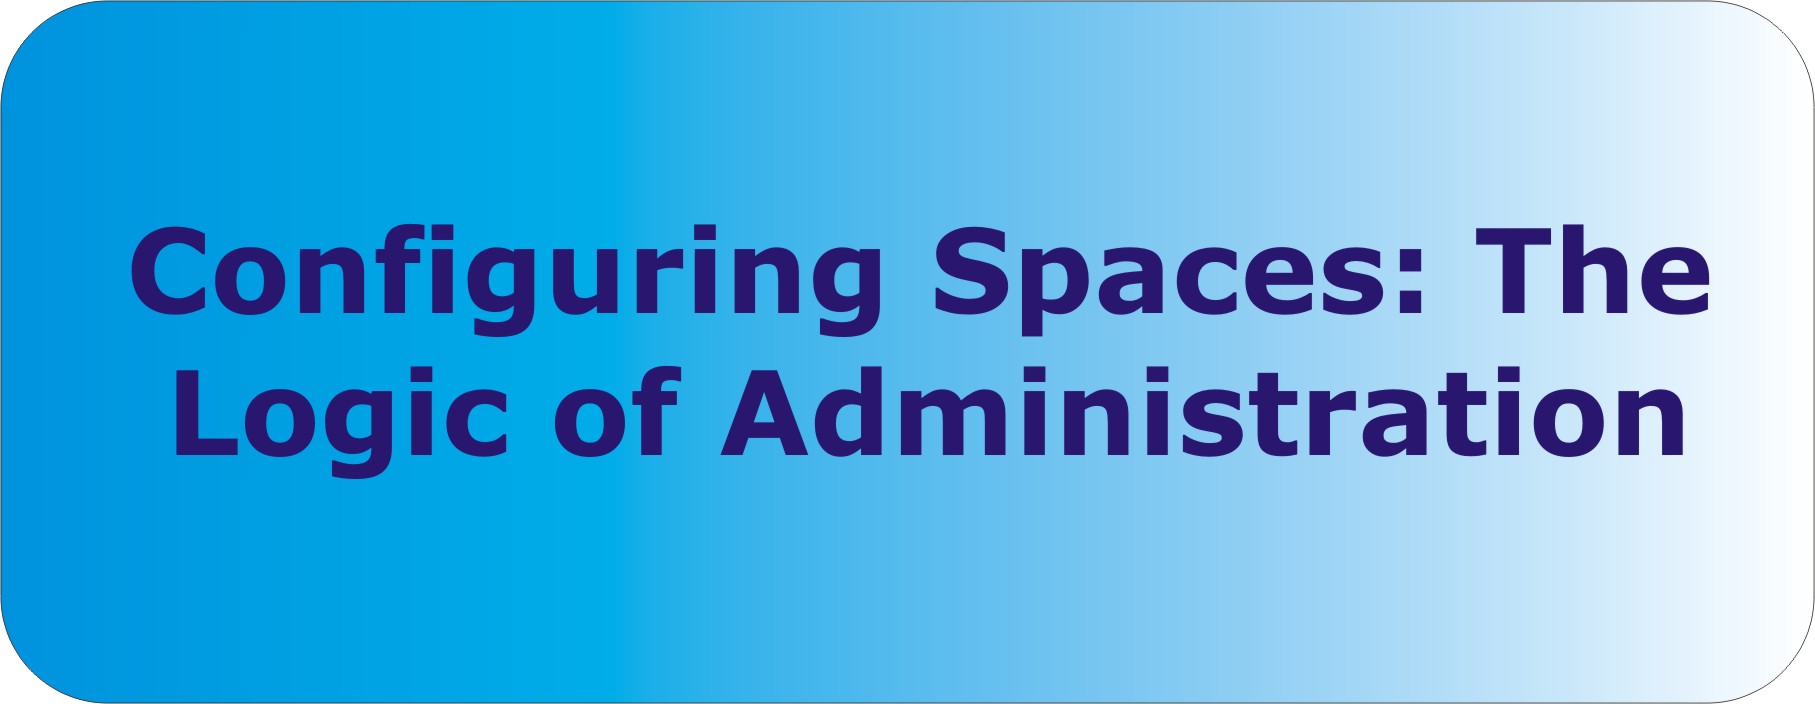 Configuring Spaces: The Logic of Administration